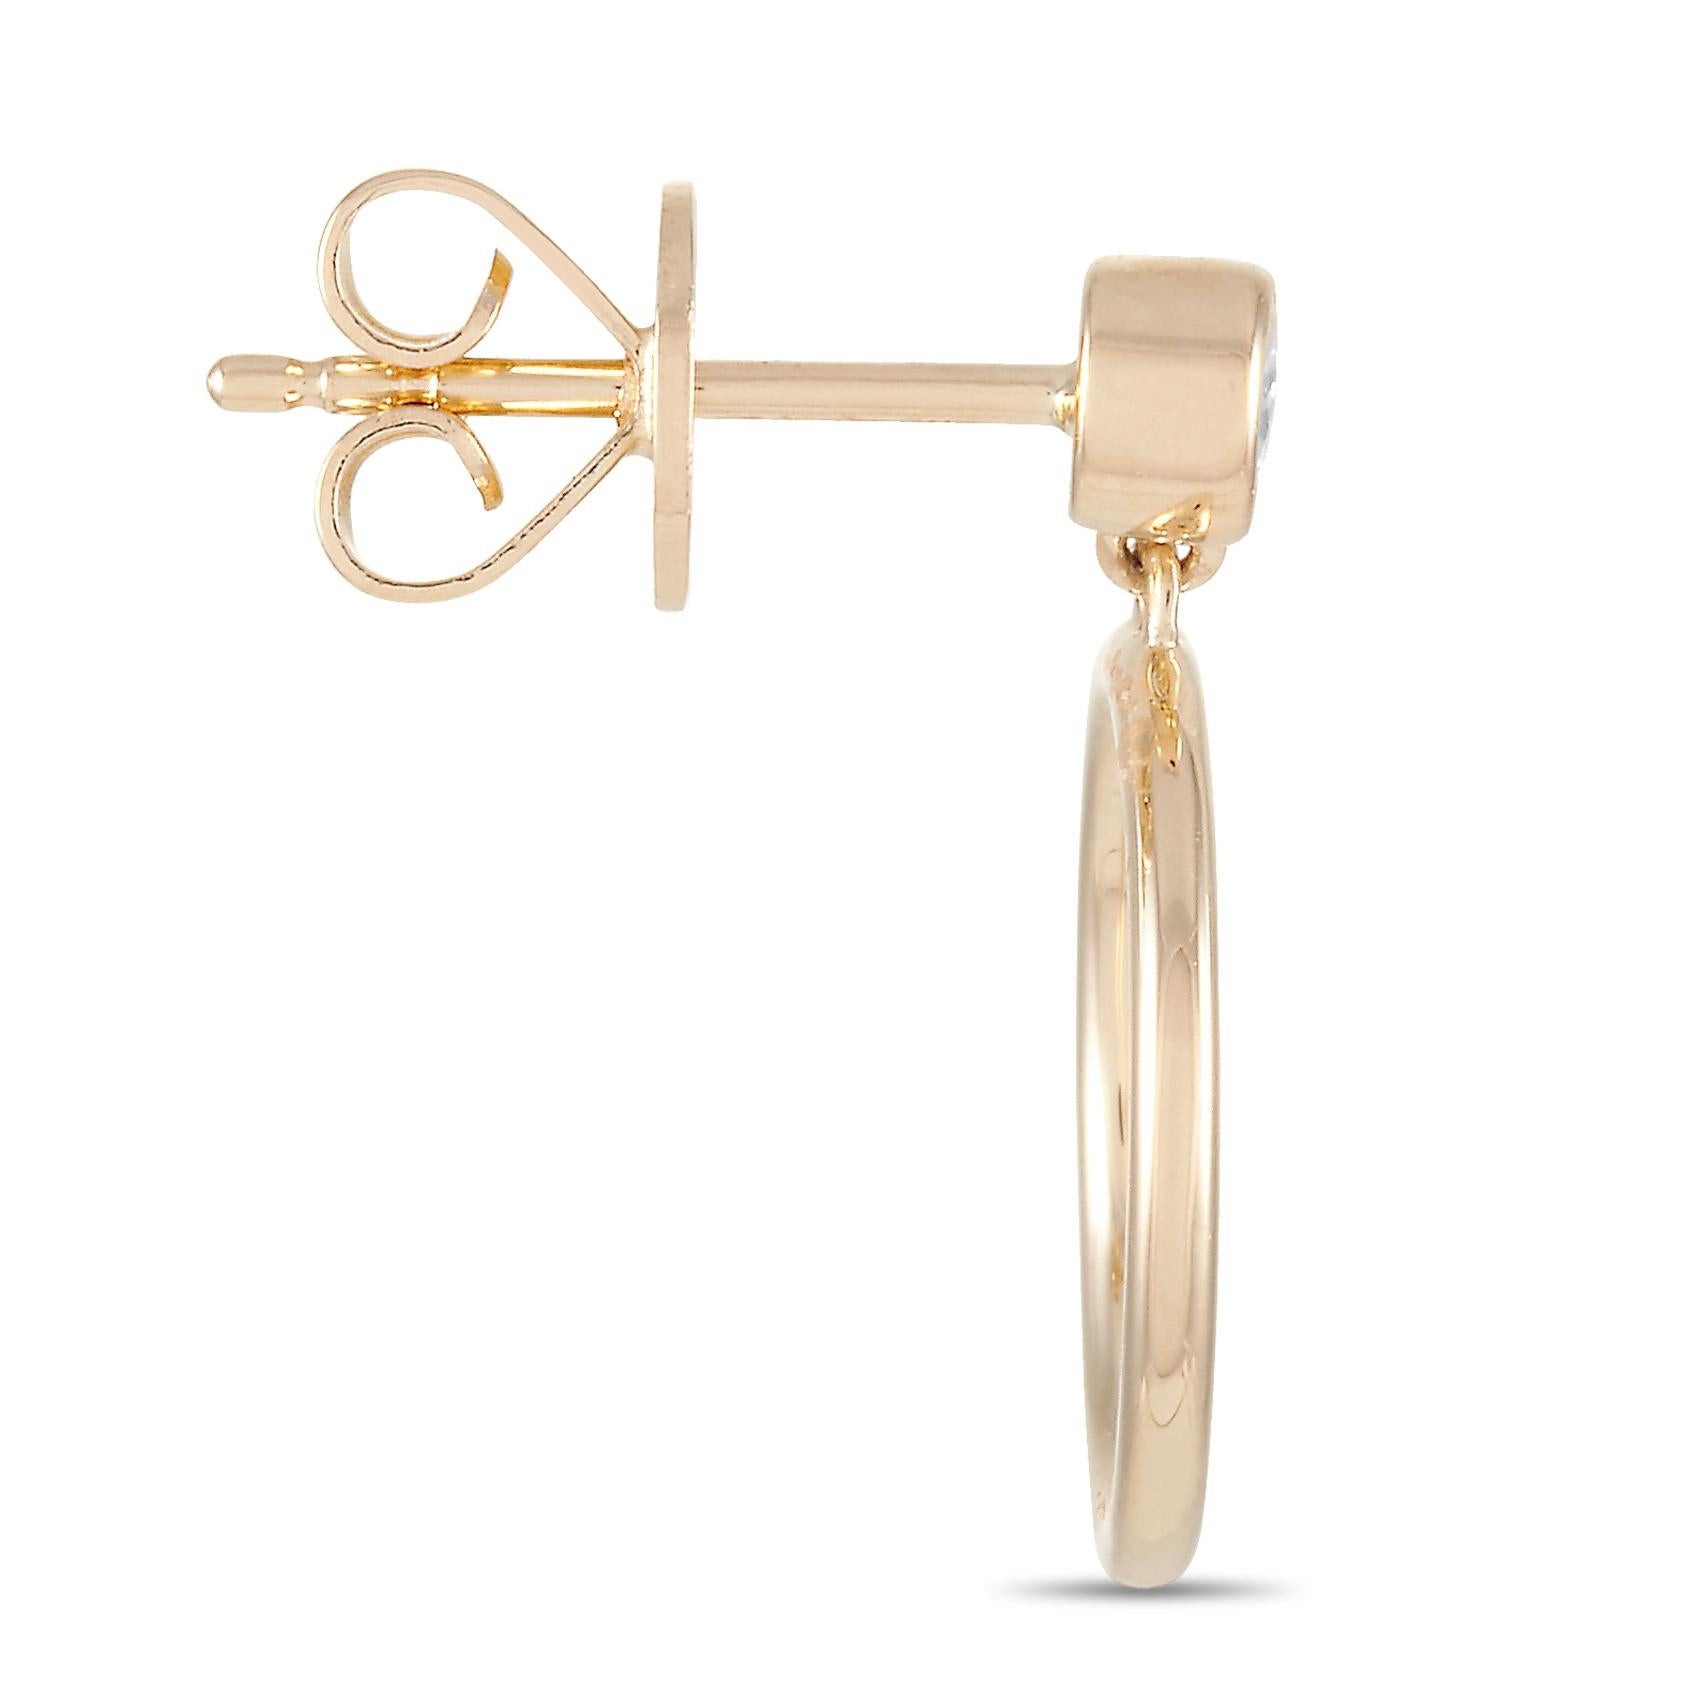 These LB Exclusive earrings are crafted from 14K yellow gold and each of the two weighs 1.1 grams. They measure 0.63” in length and 0.50” in width. The pair is set with diamonds that total 0.18 carats.
 
 The earrings are offered in brand new